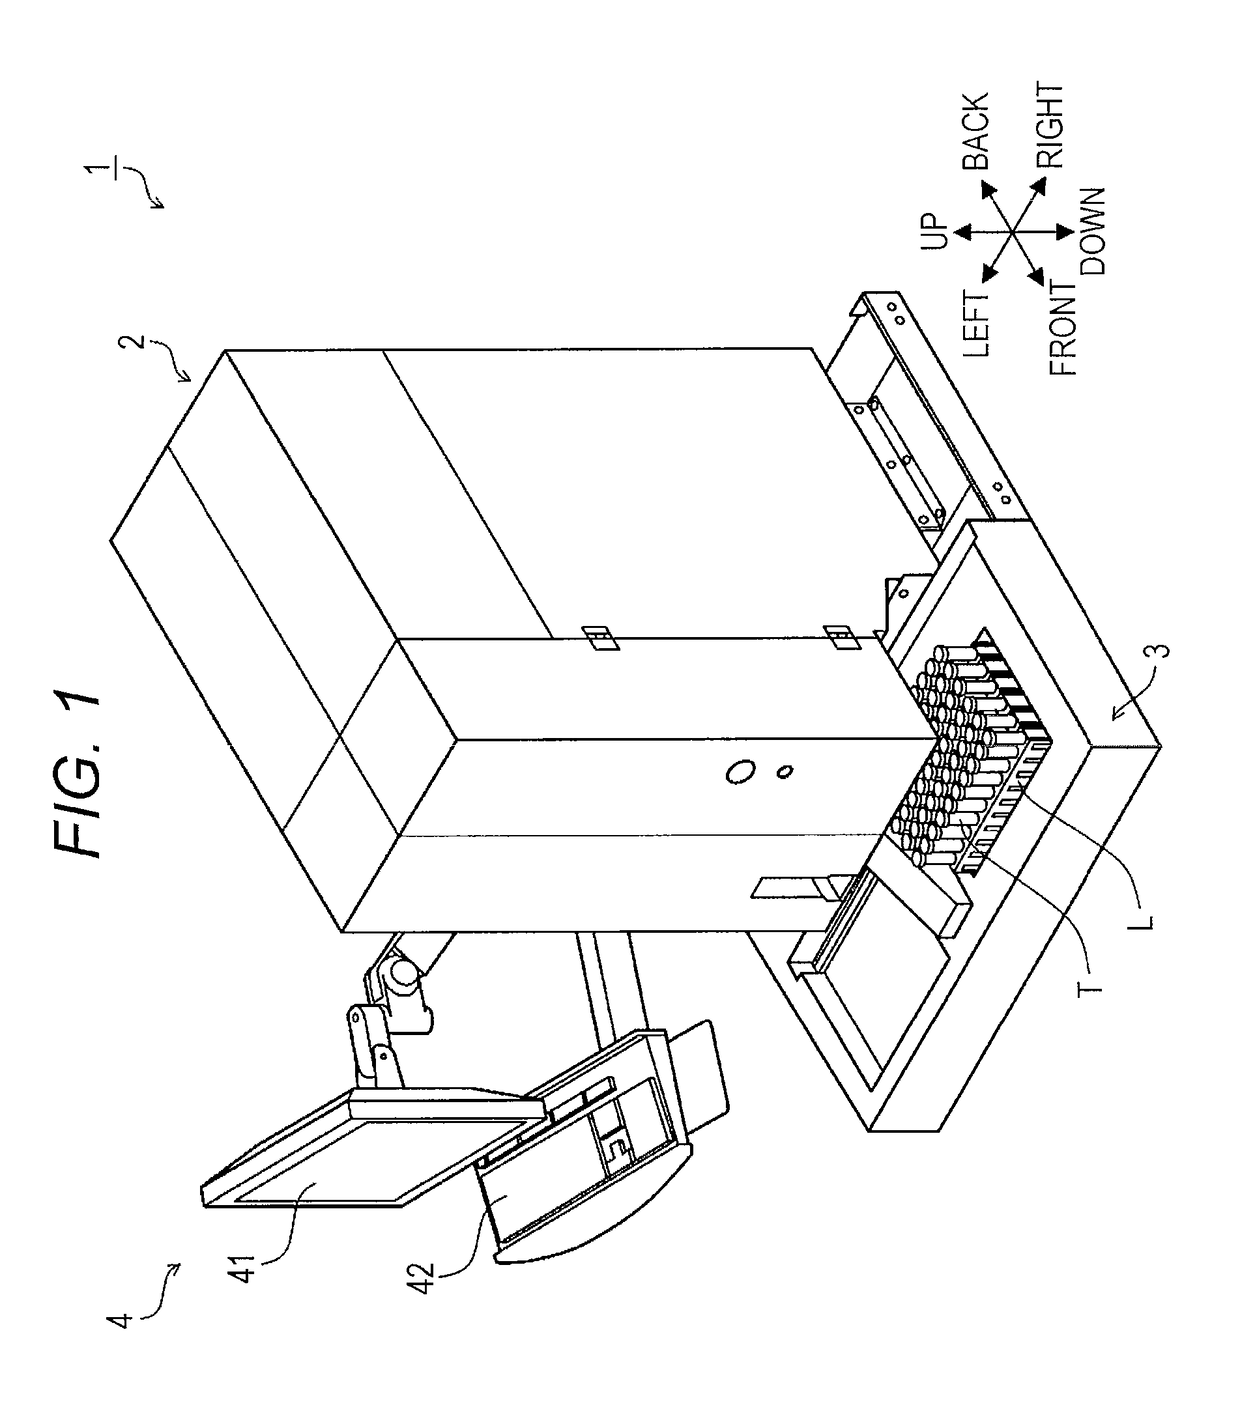 Blood cell analyzer and blood cell analyzing method